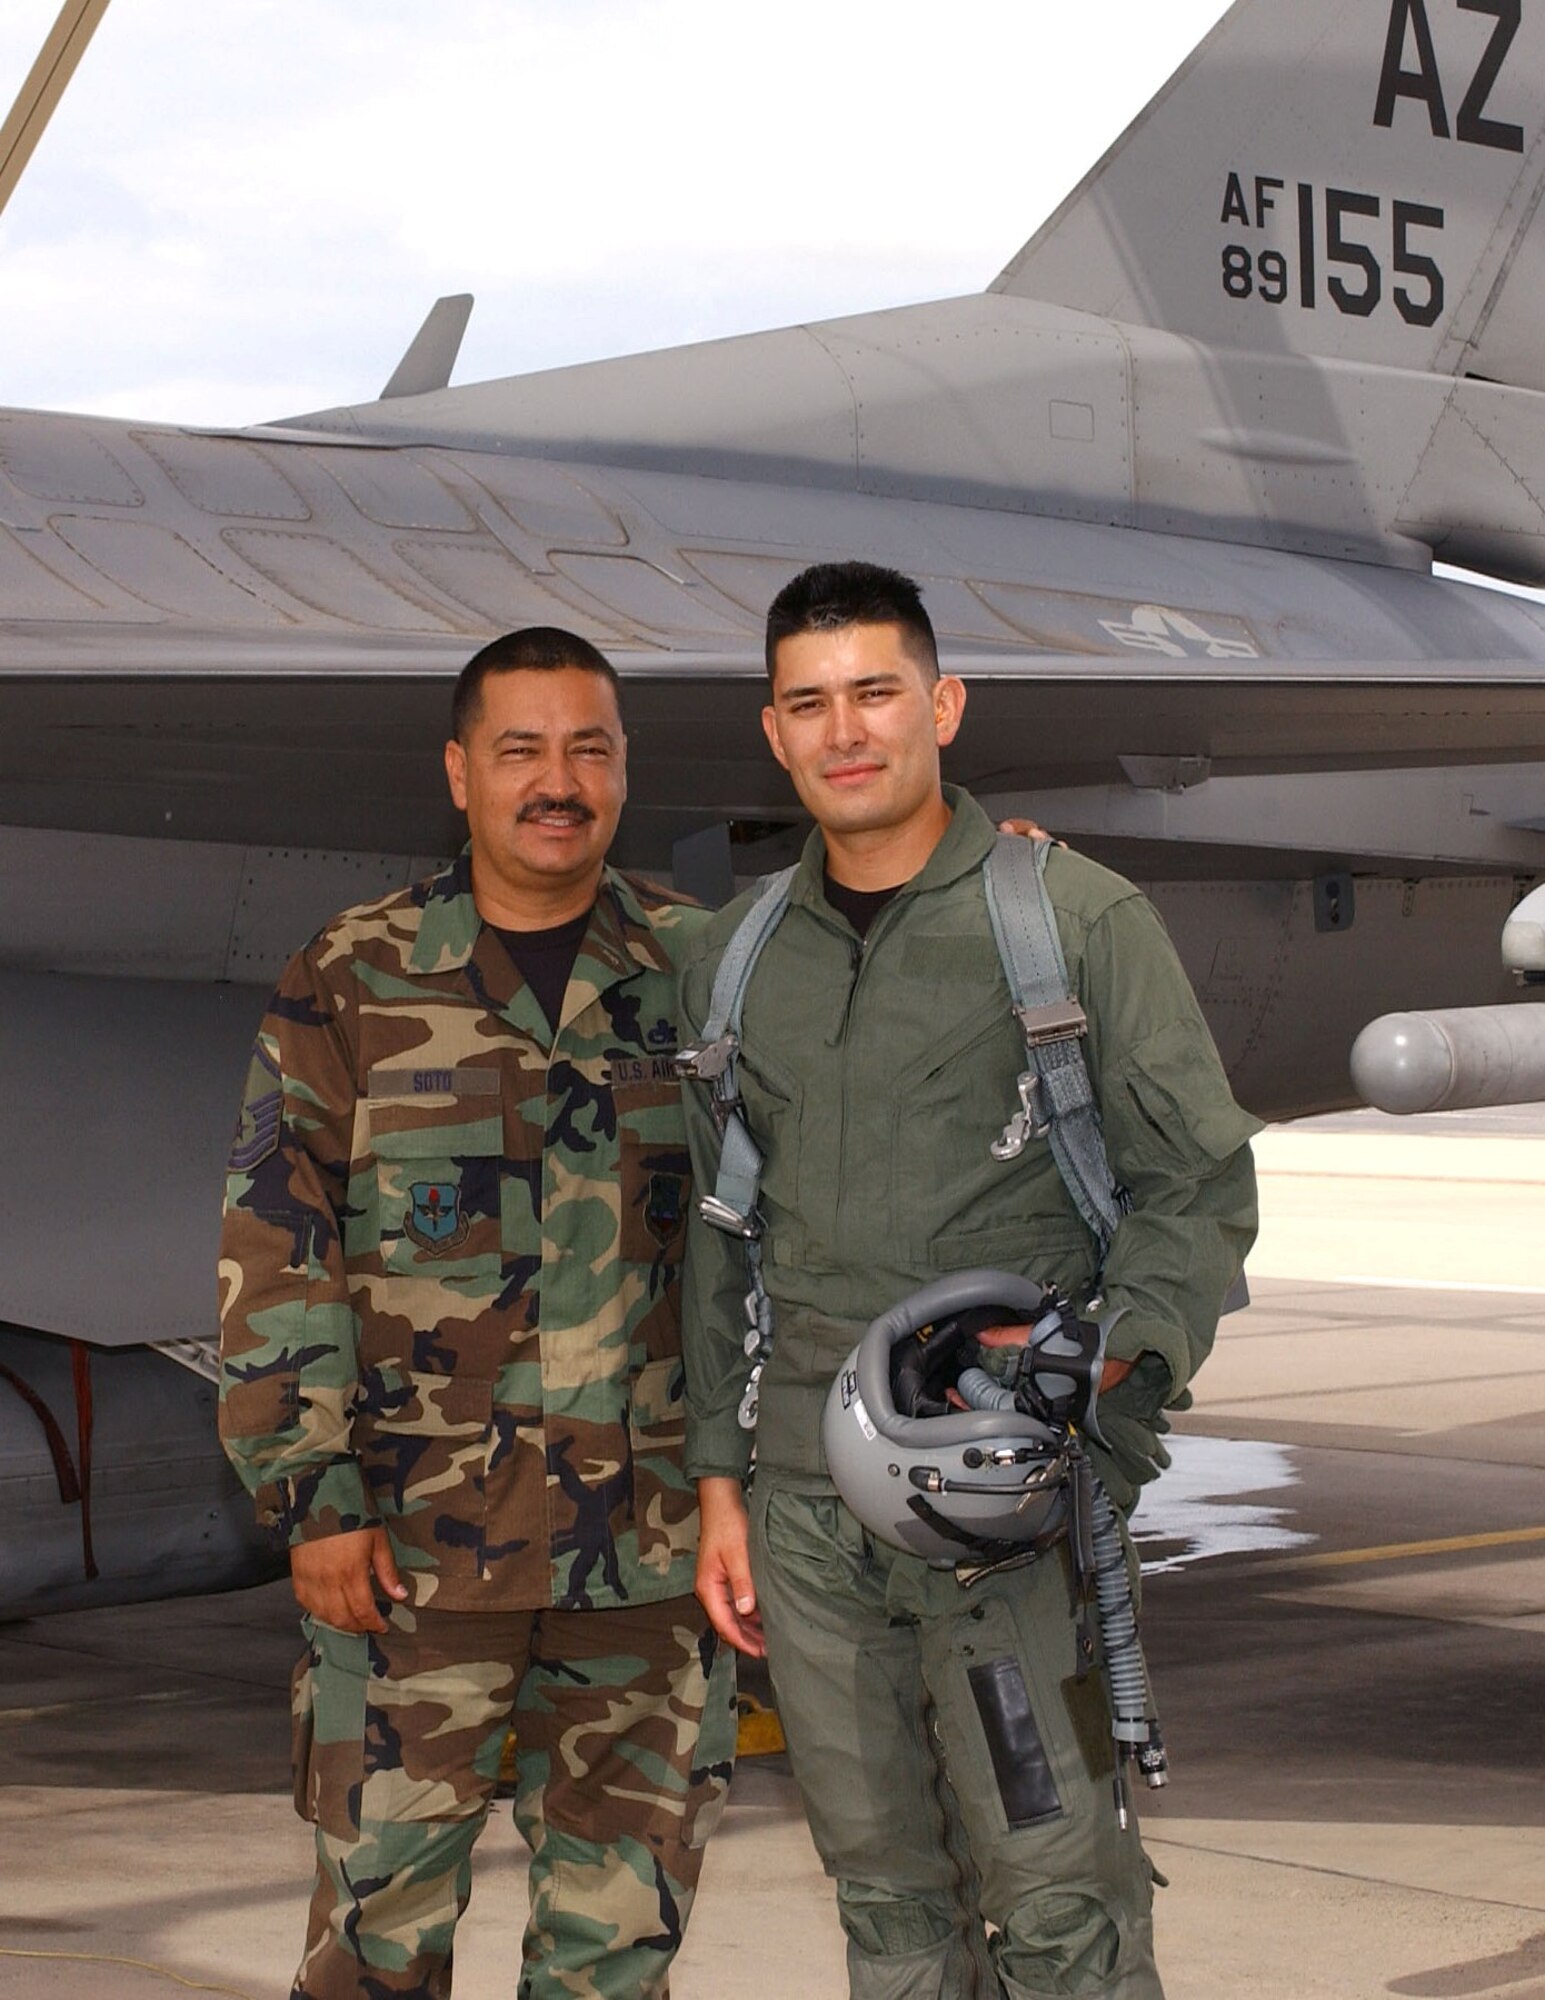 Master Sgt. Alfonso Soto (left), an F-16 crew chief, and his son Senior Airman Guillermo Soto meet up on the flightline after Airman Soto’s incentive flight. Airman Soto, an electronics technician, flew July 13 as reward for earning Airman of the Quarter for the wing. His father was the crew chief who launched the flight. "I'm so proud that my son was selected for Airman of the Quarter and it's a
once-in-a-lifetime opportunity to be able to launch him on an F-16
flight," said Sergeant Soto. (Air National Guard Photo by Senior Airman Sara Elliott.)